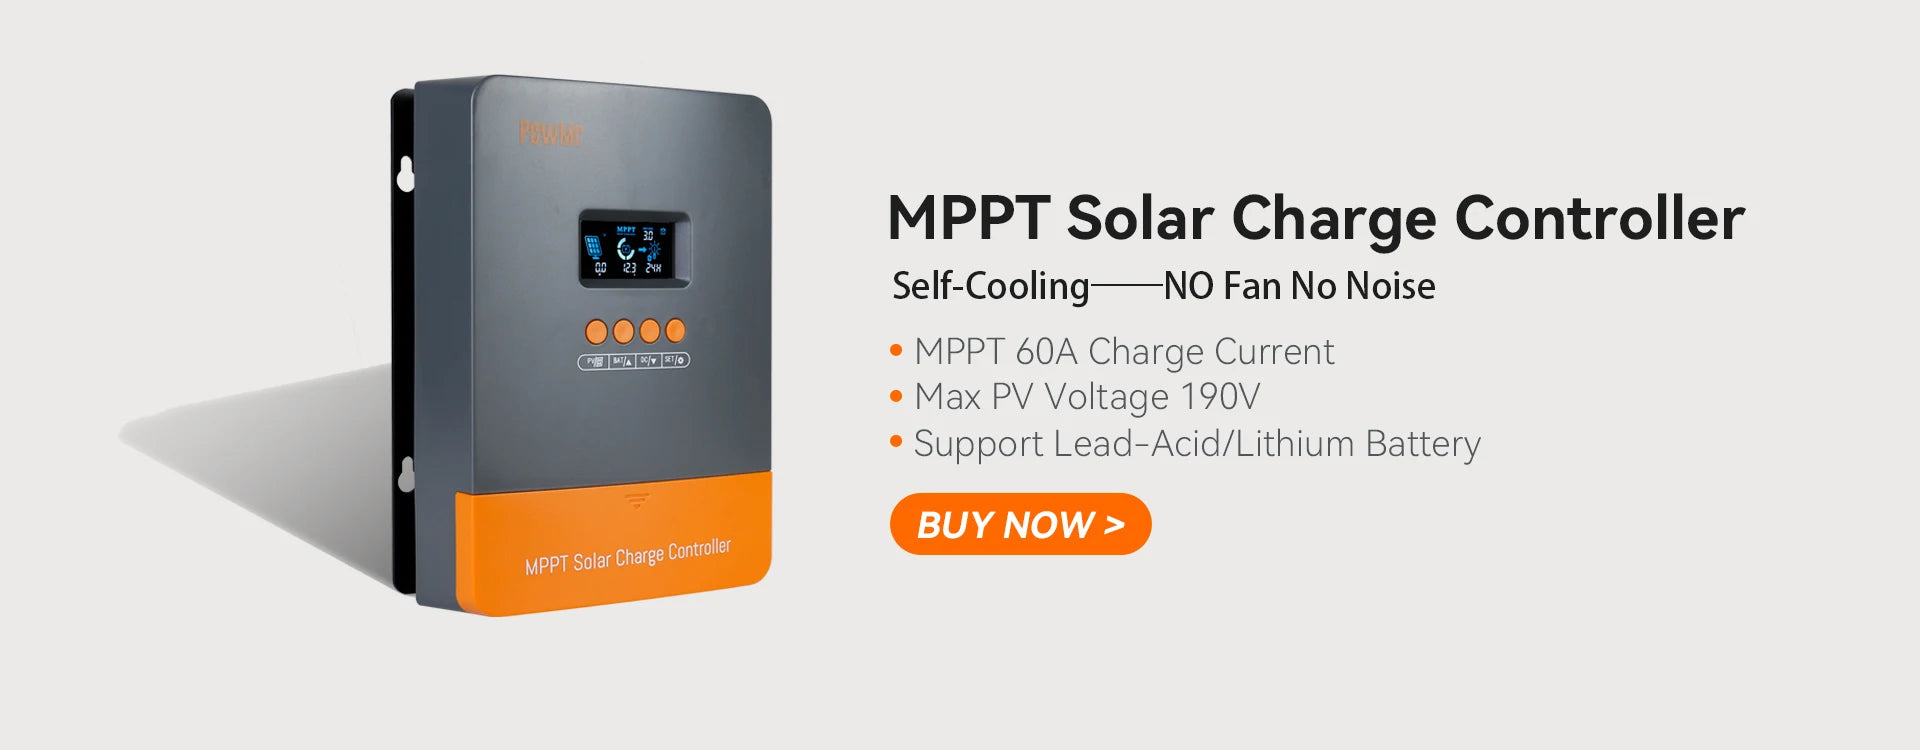 MPPT Solar Regulator with 60A charge current and 190V PV voltage support for lead-acid and lithium batteries.